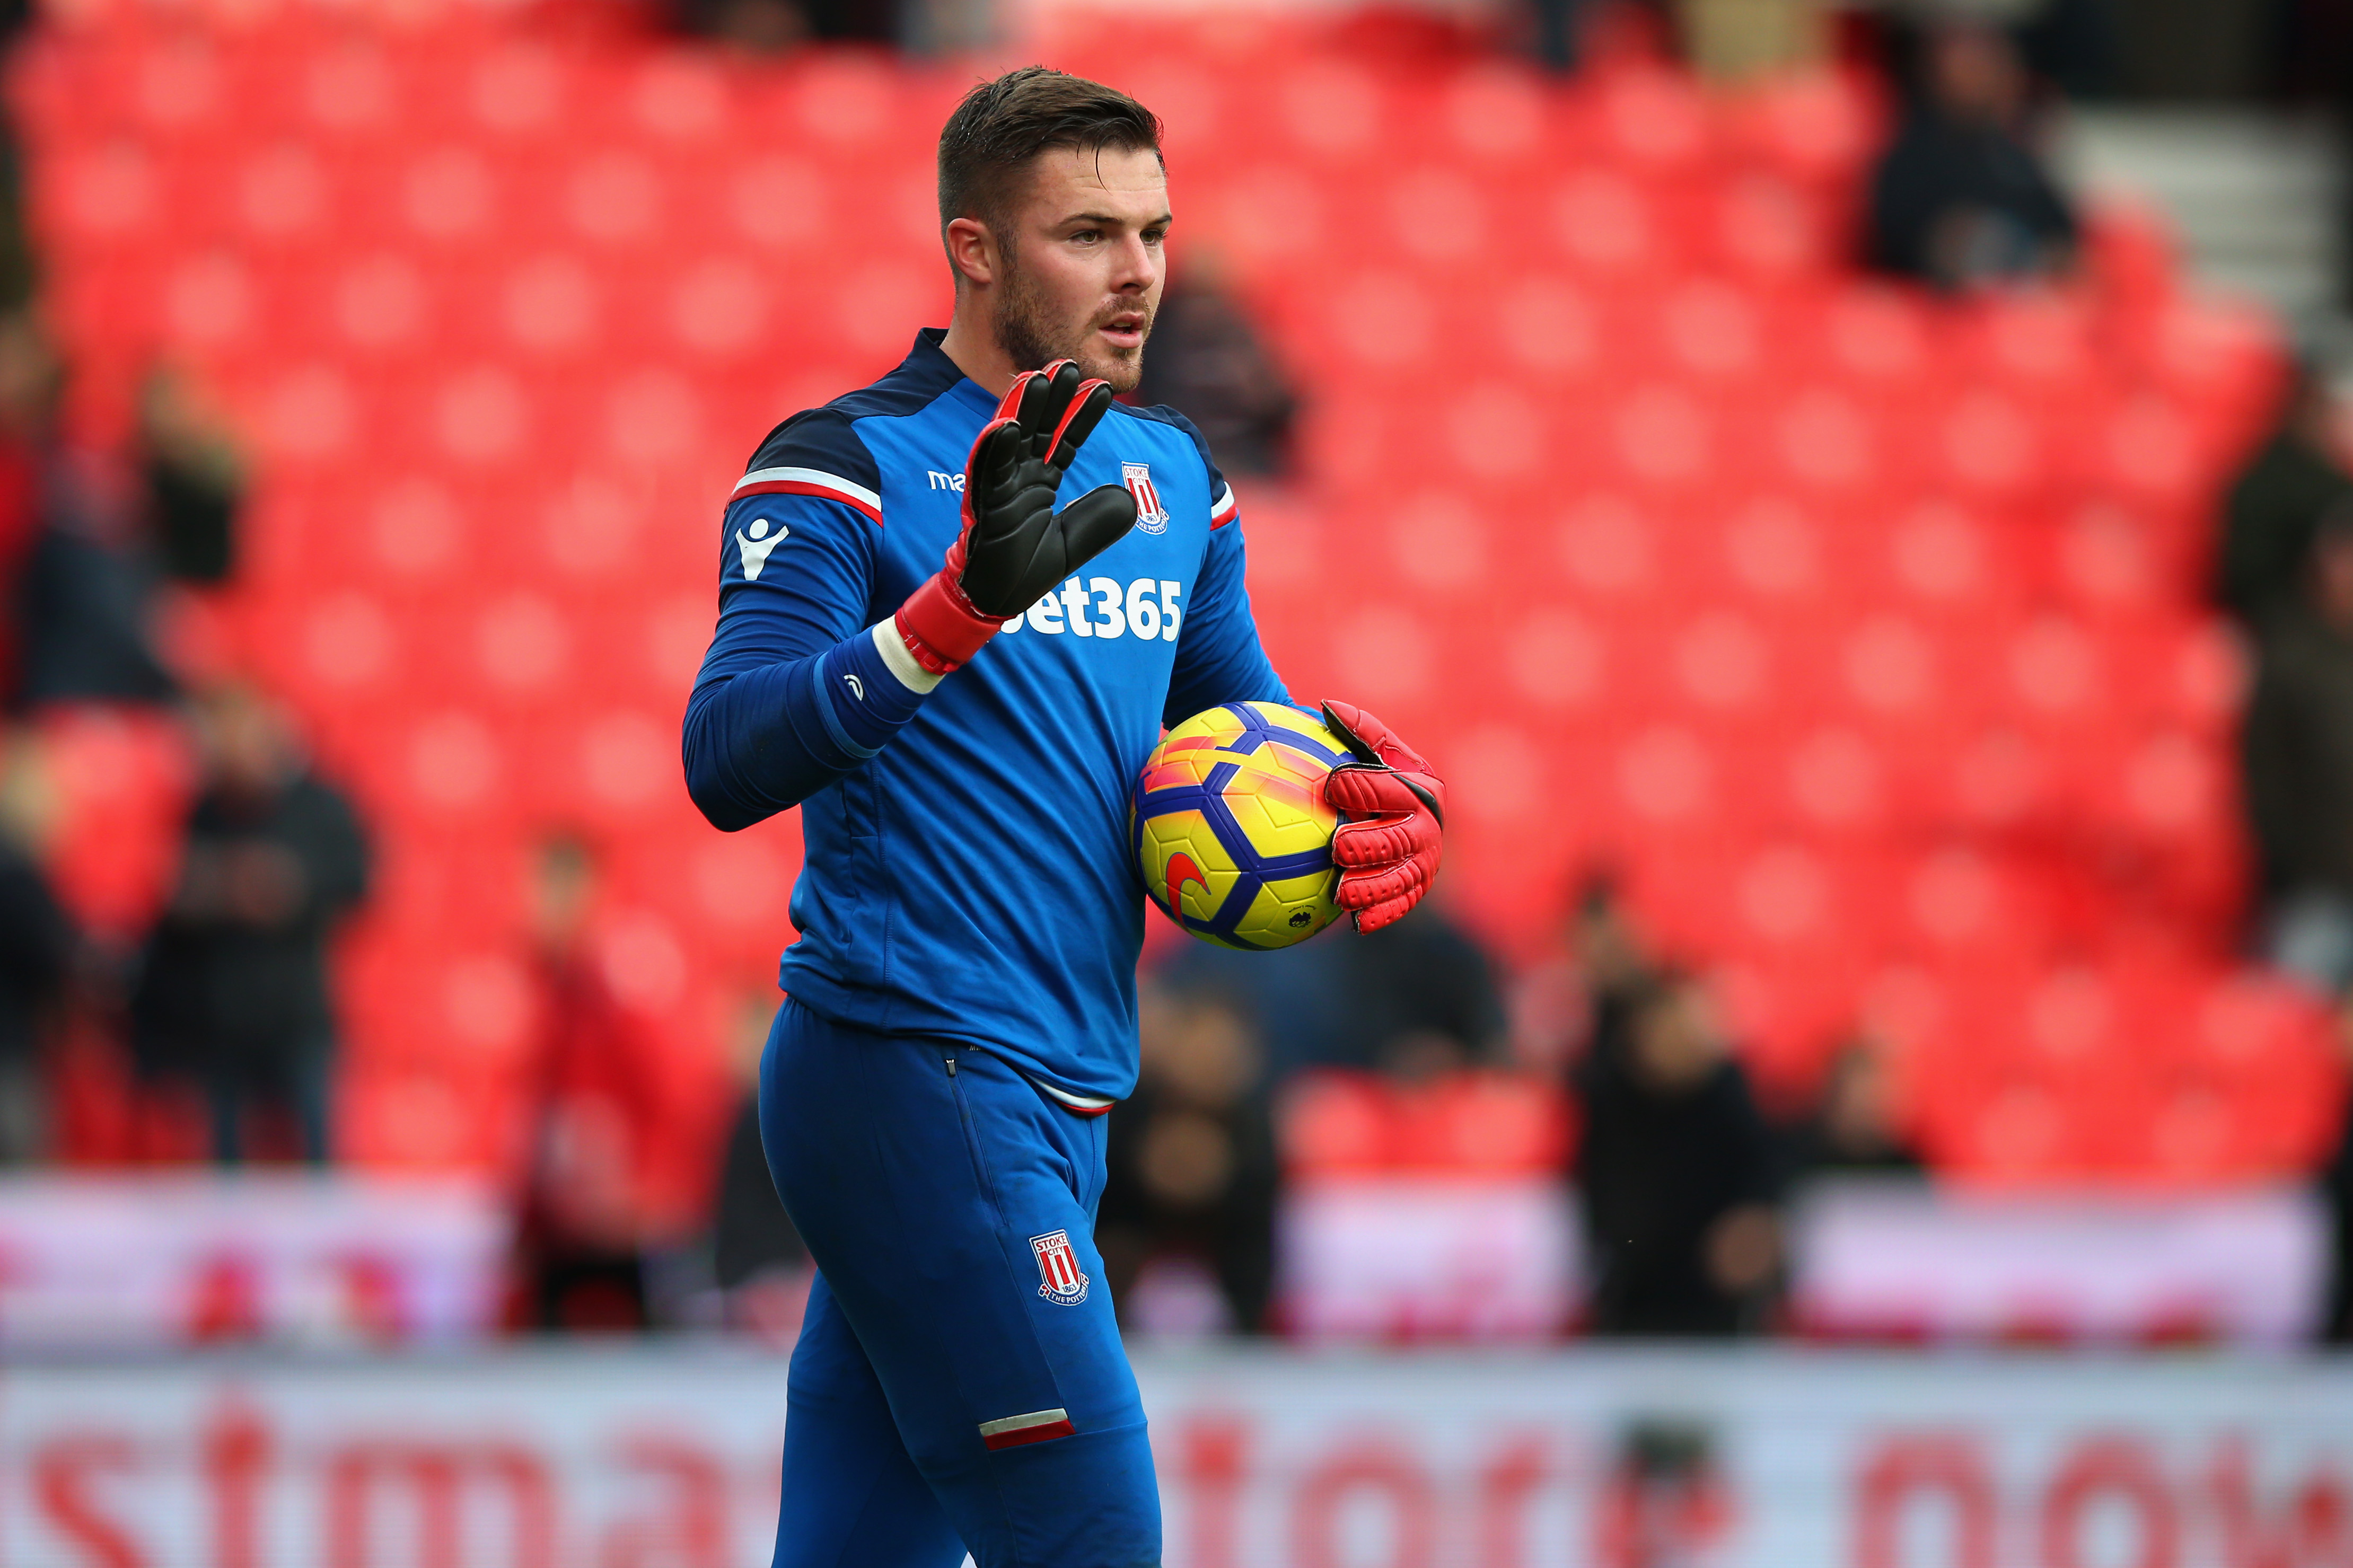 STOKE ON TRENT, ENGLAND - DECEMBER 02:  Jack Butland of Stoke City warms up prior to the Premier League match between Stoke City and Swansea City at Bet365 Stadium on December 2, 2017 in Stoke on Trent, England.  (Photo by Alex Livesey/Getty Images)